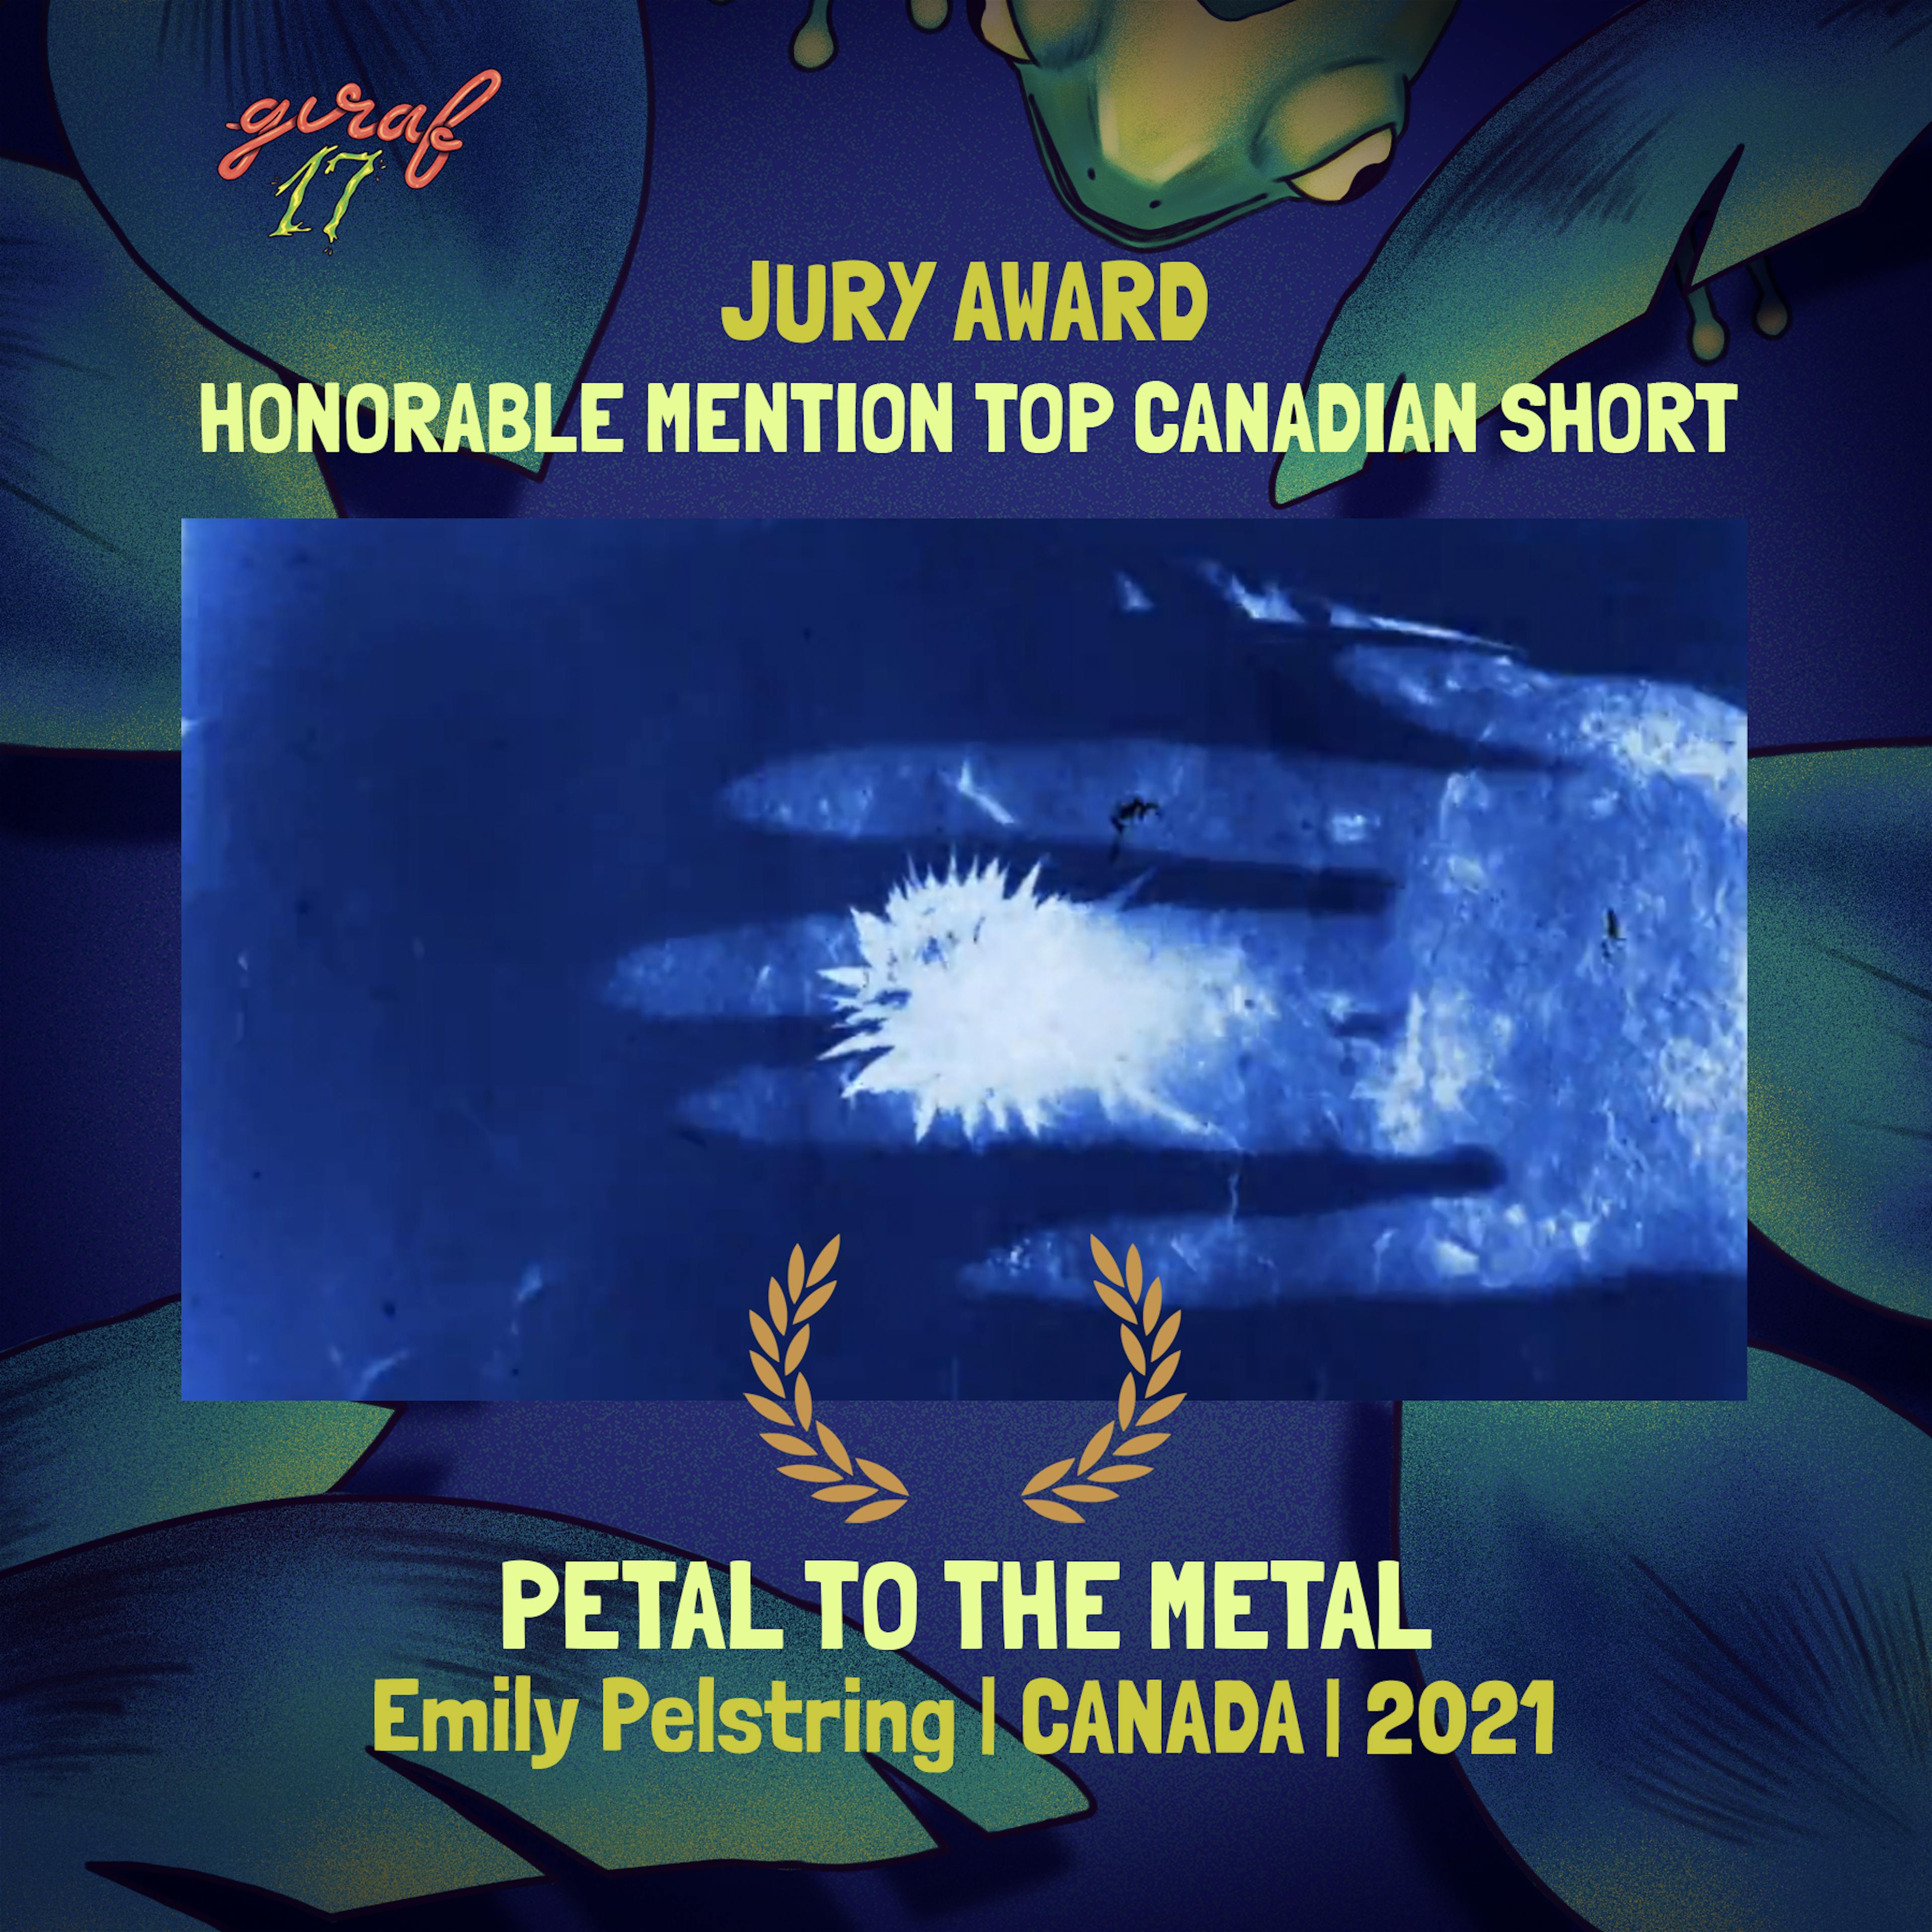 A ghostly image of a hand holding a flower. Surrounding text: GIRAF17 Jury Award, Honorable Mention Top Canadian Short; Petal to the Metal; Emily Pelstring; Canada; 2021